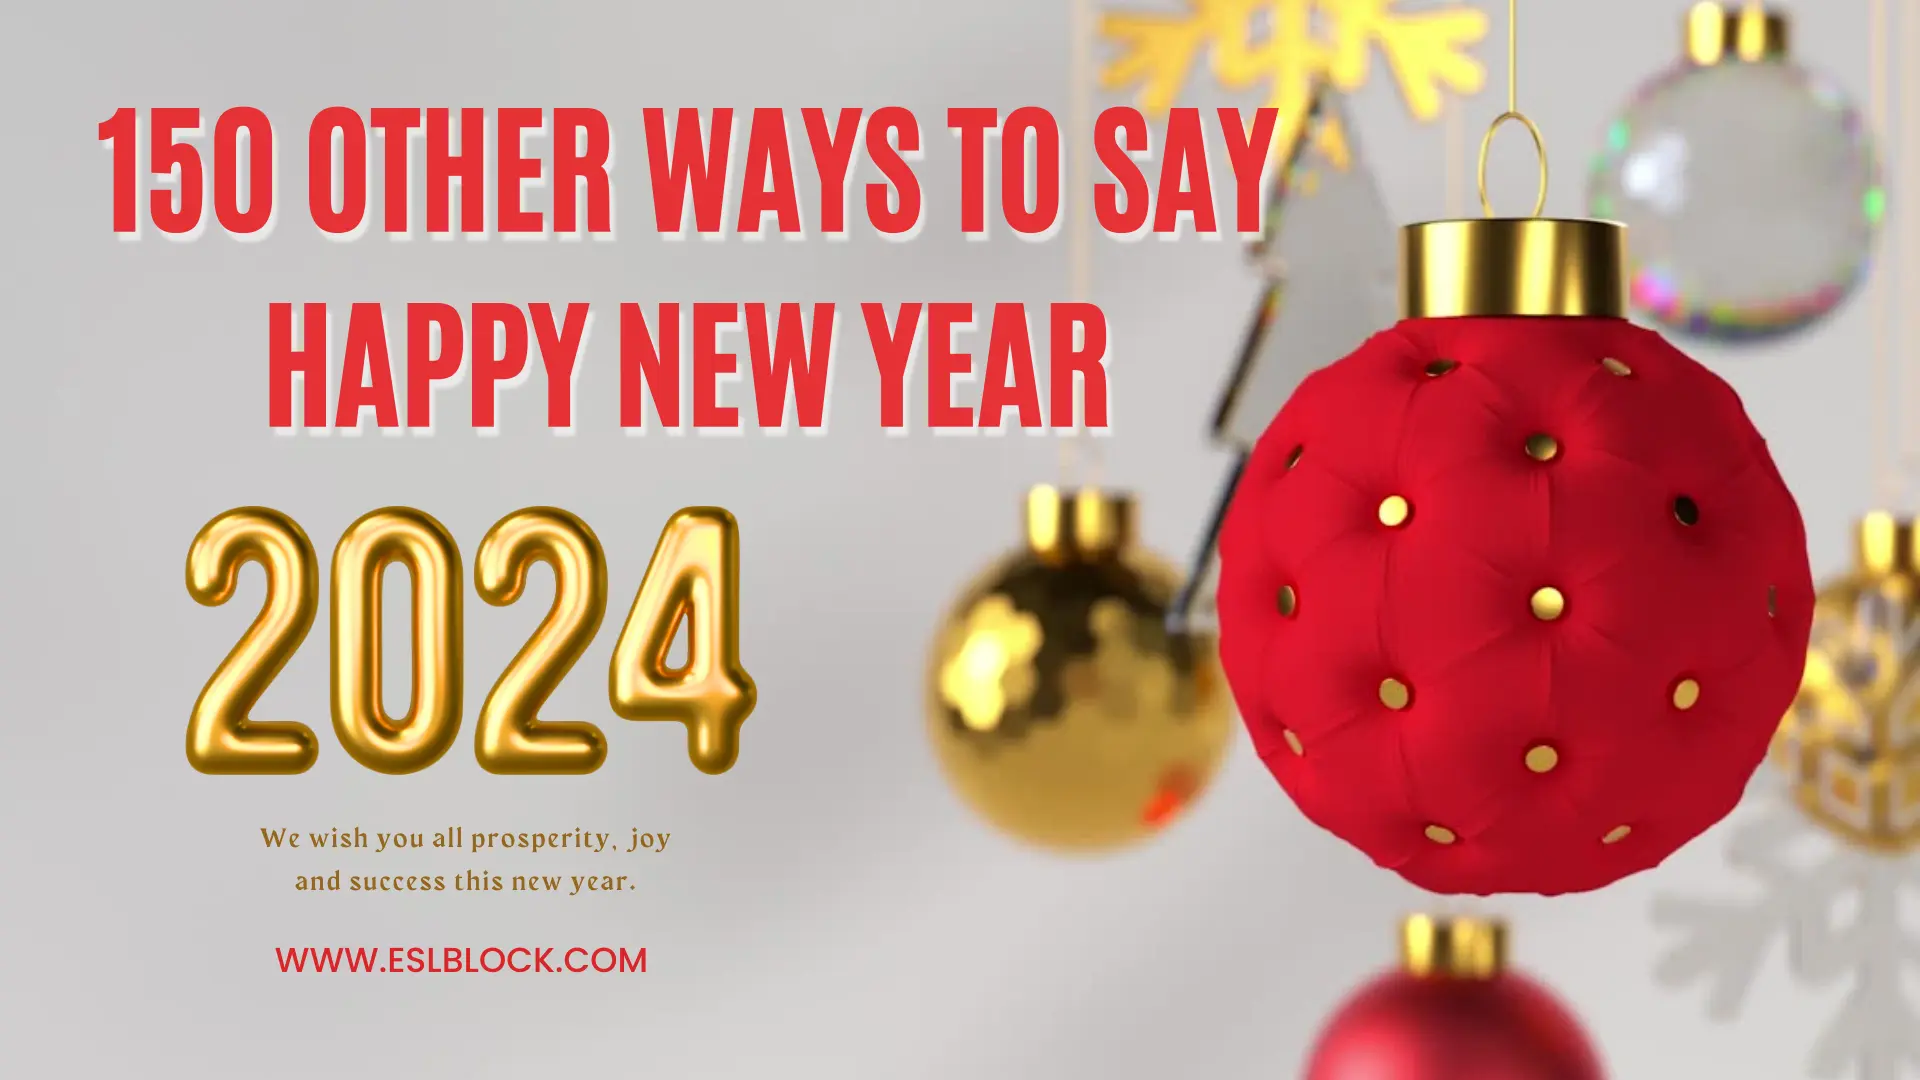 150 Other Ways to Say Happy New Year